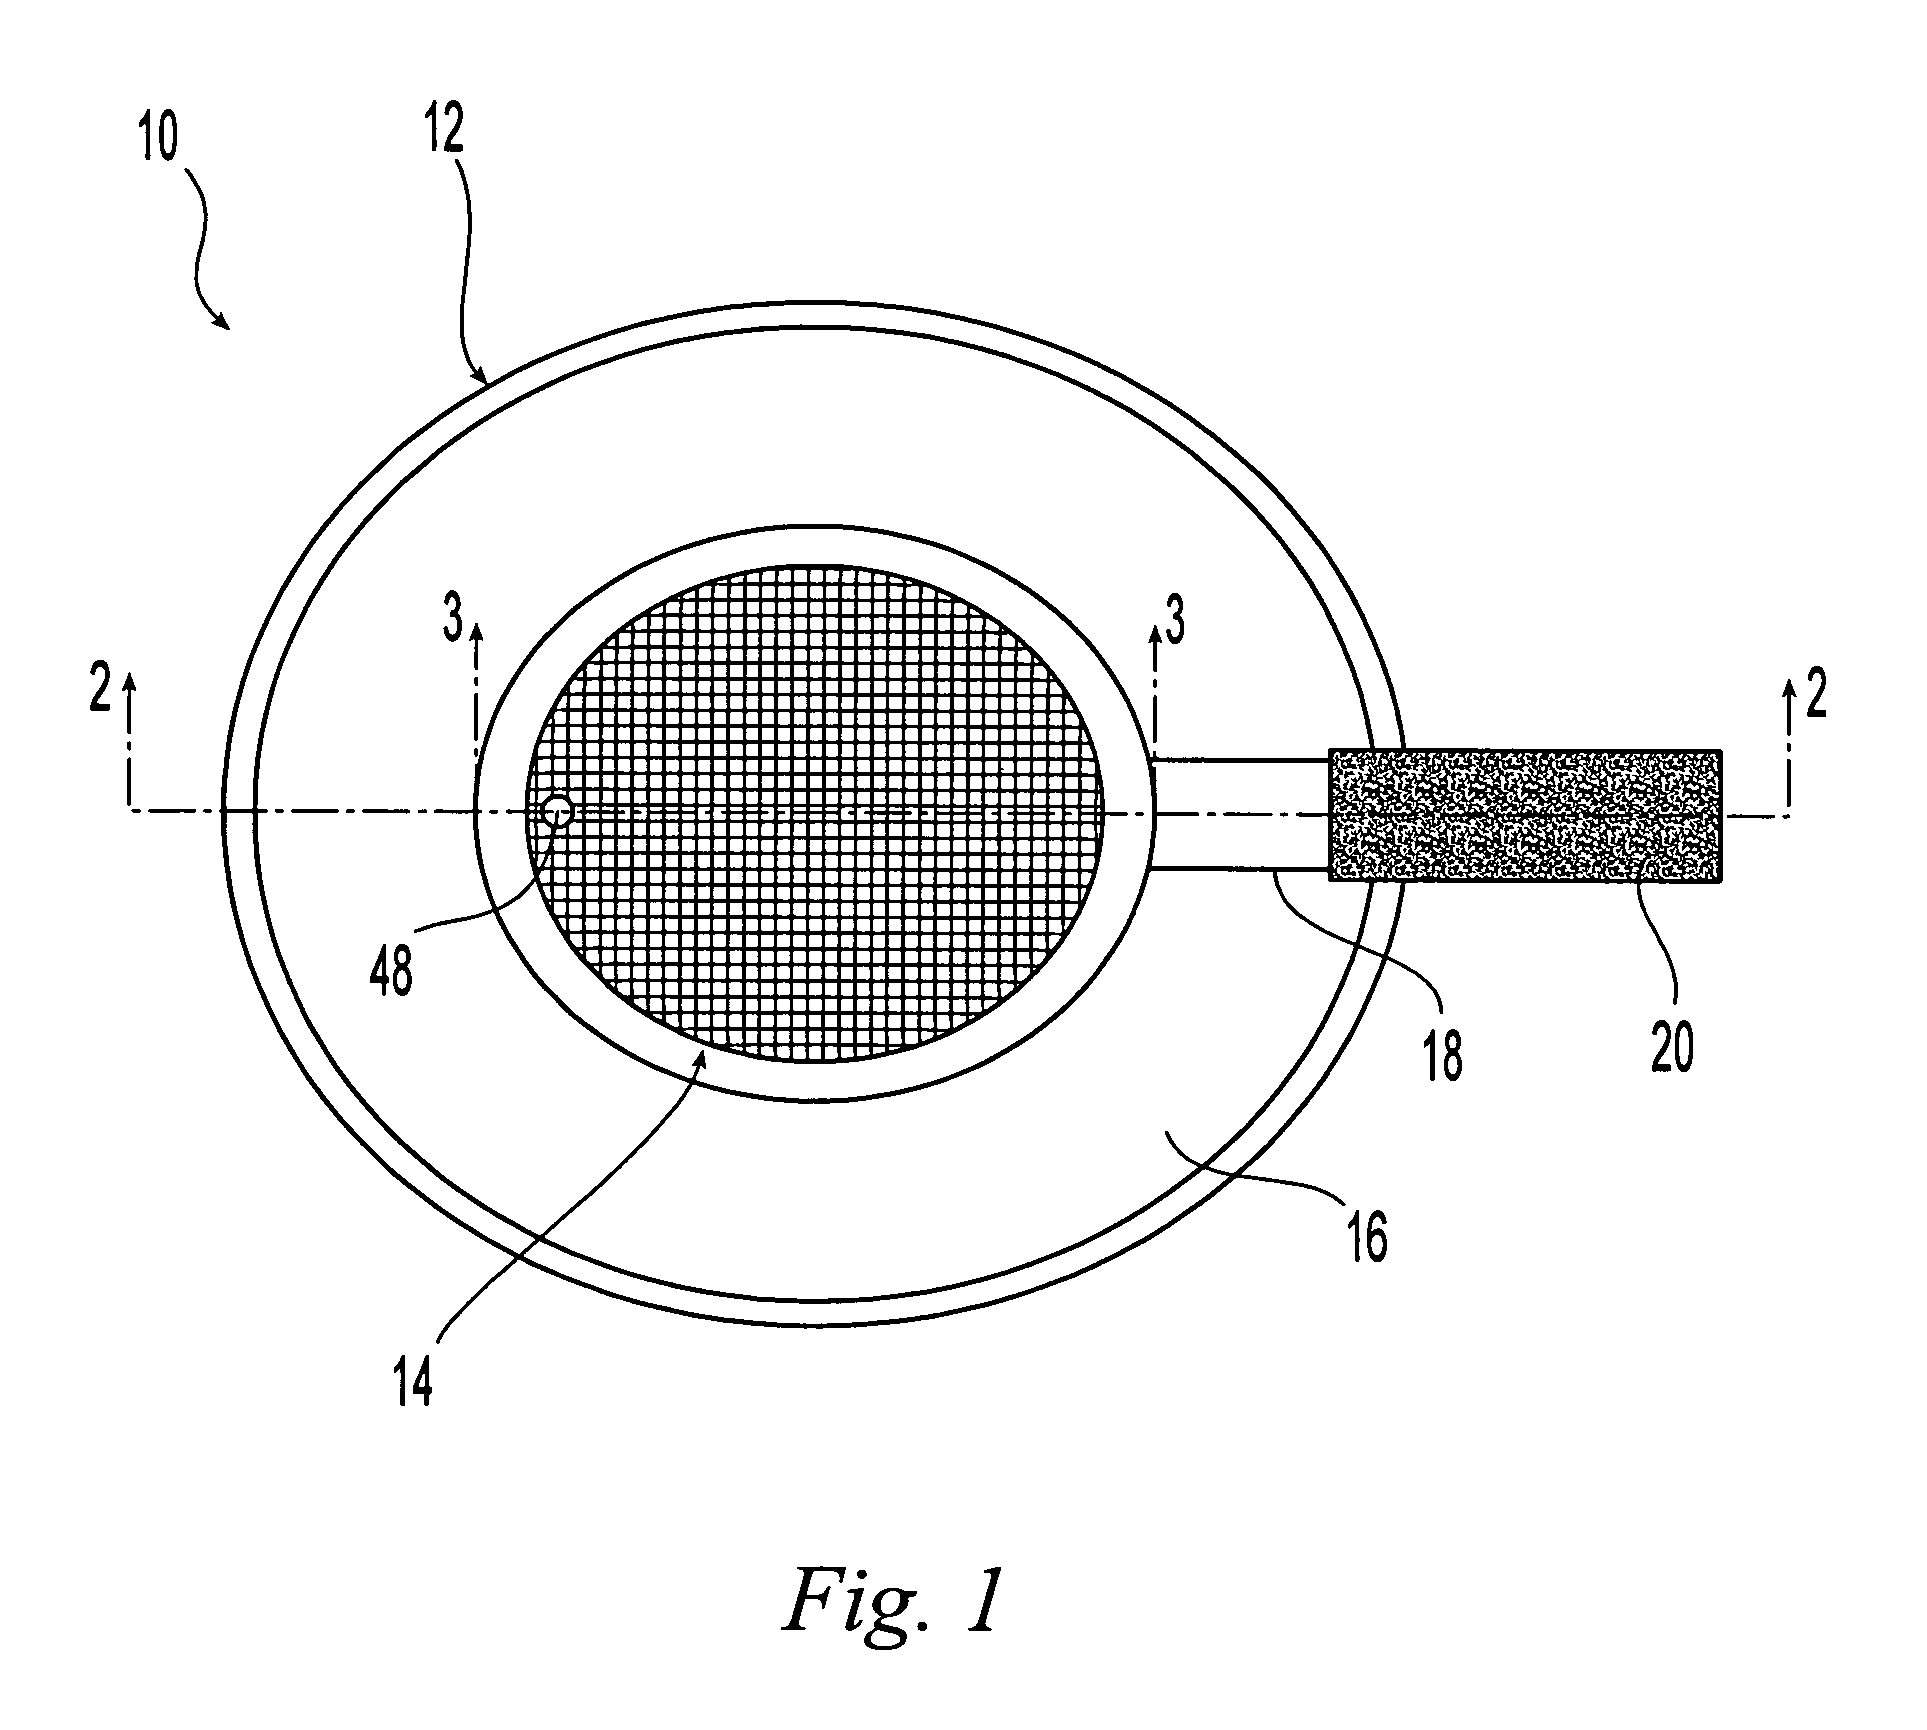 Visual acoustic device